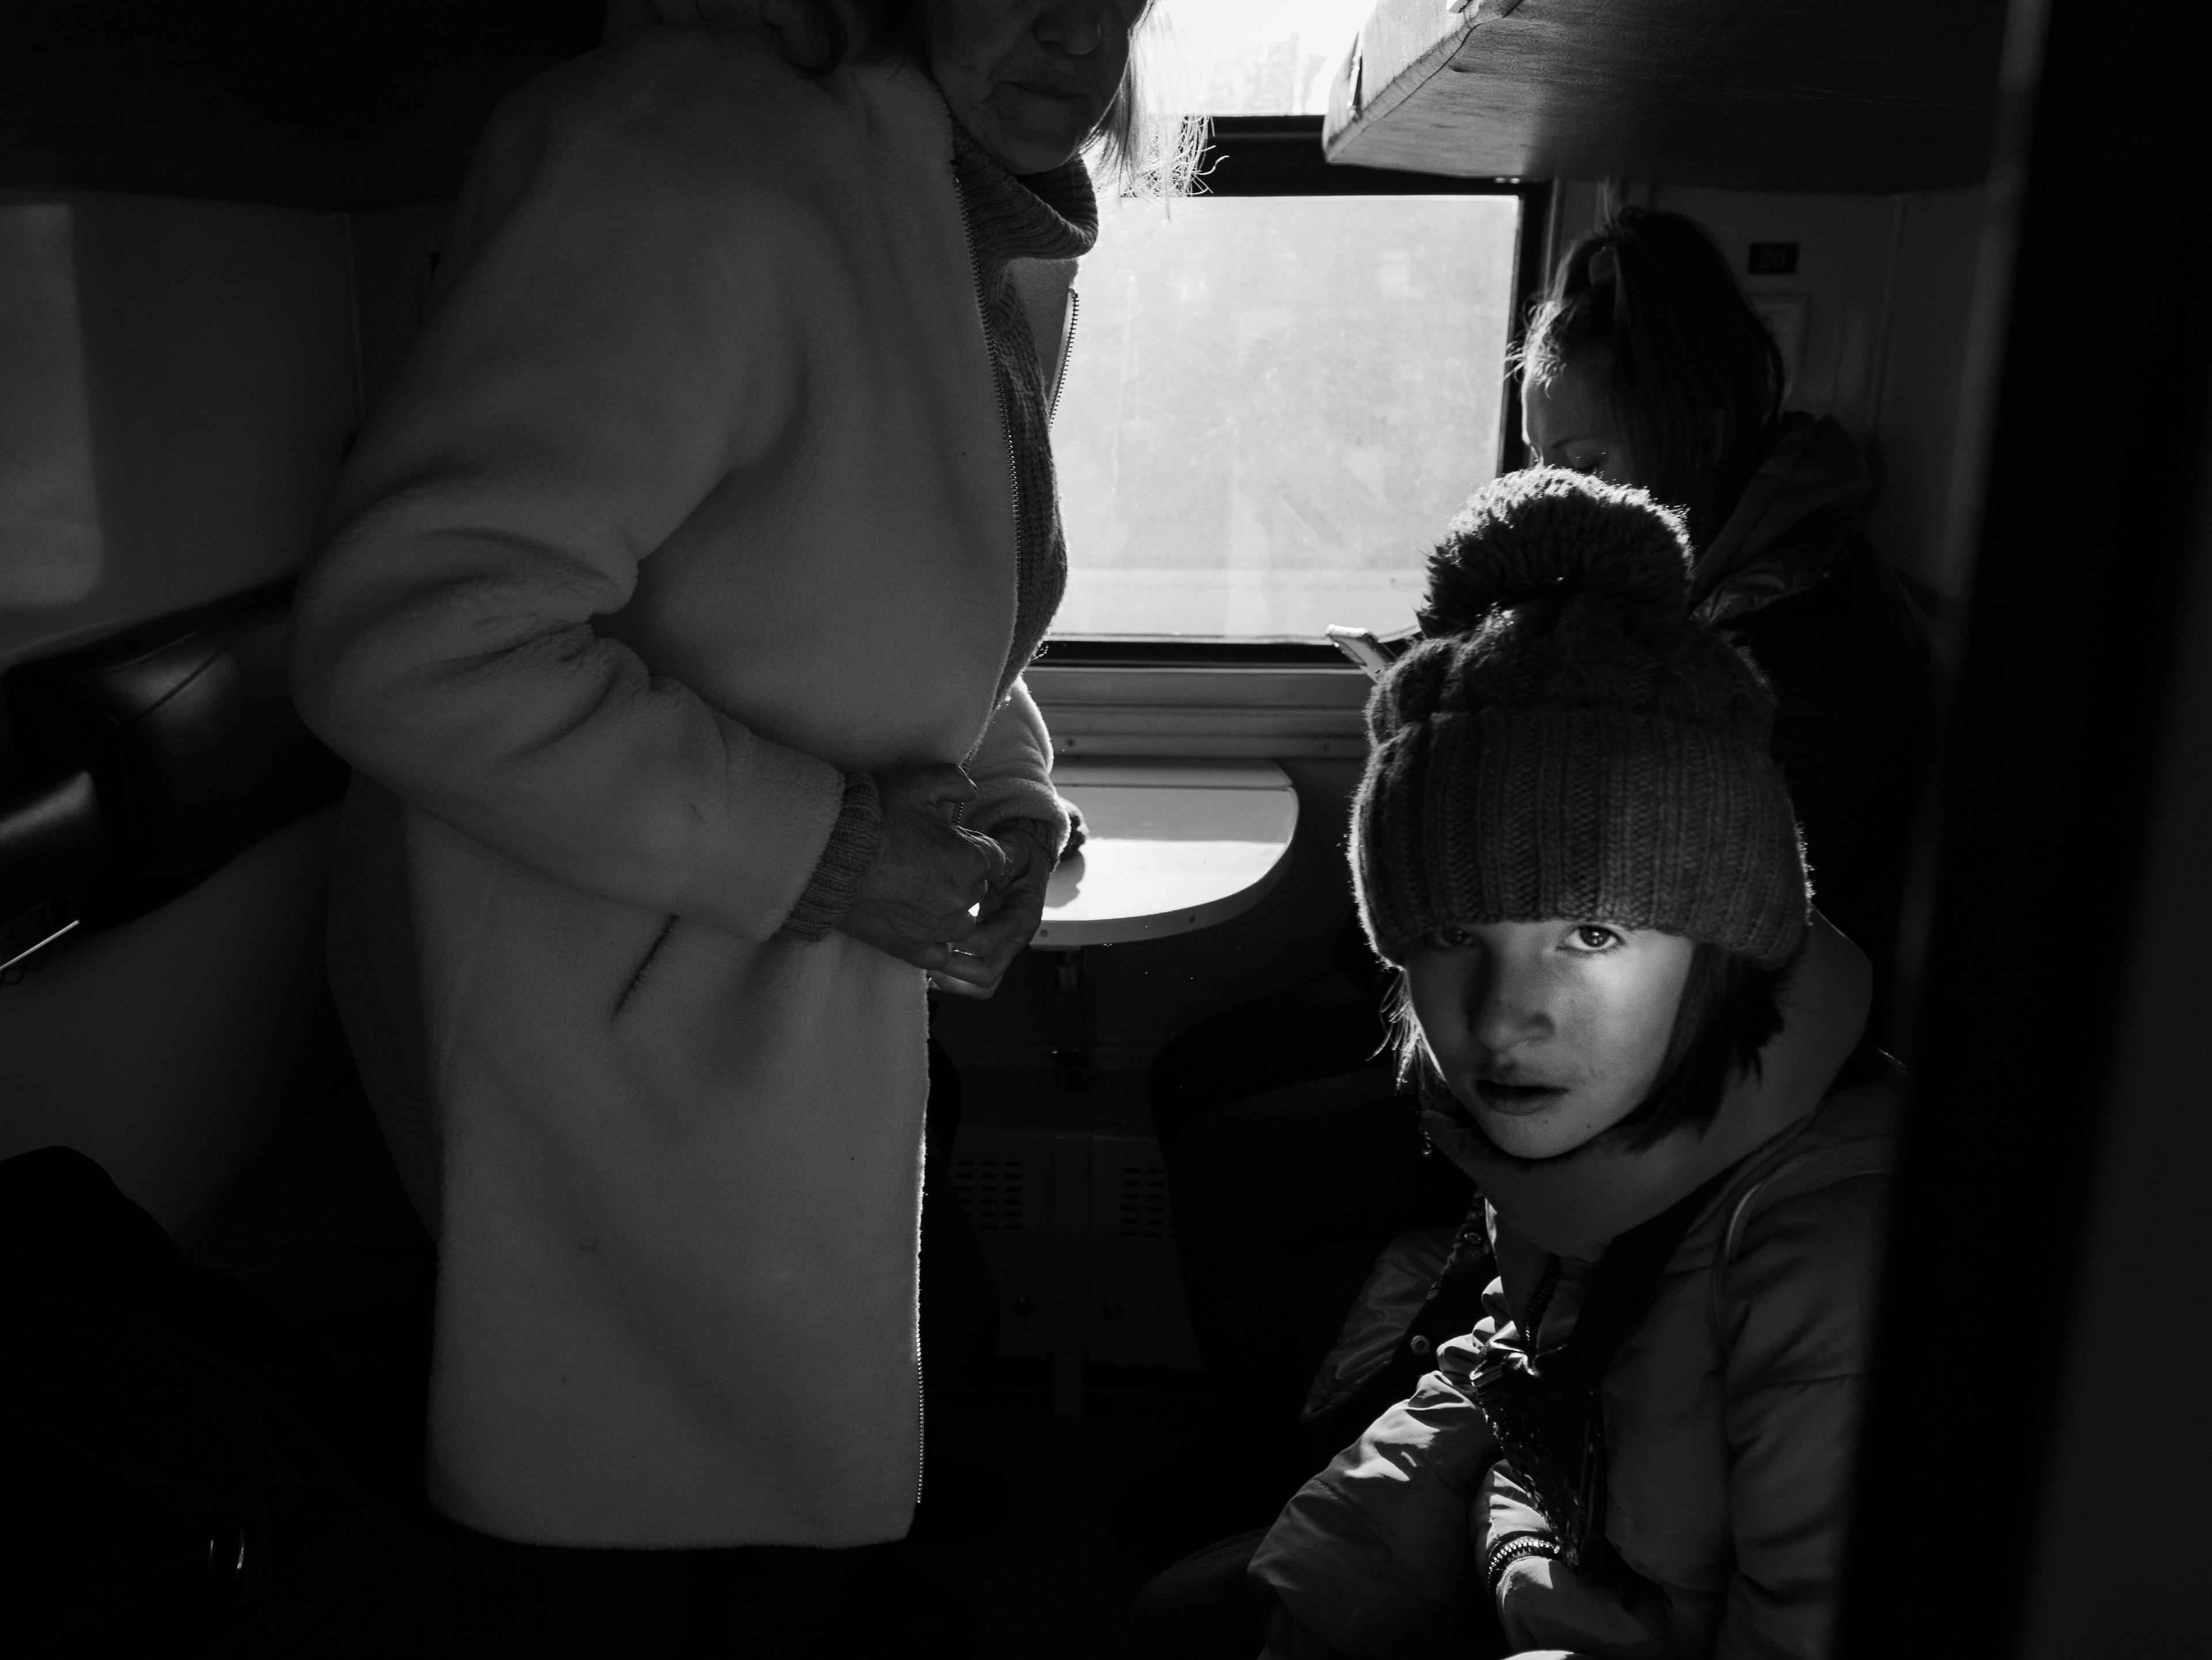 A portrait of a young girl with her family waiting to leave Lviv | Photo: © 2022 SVET JACQUELINE